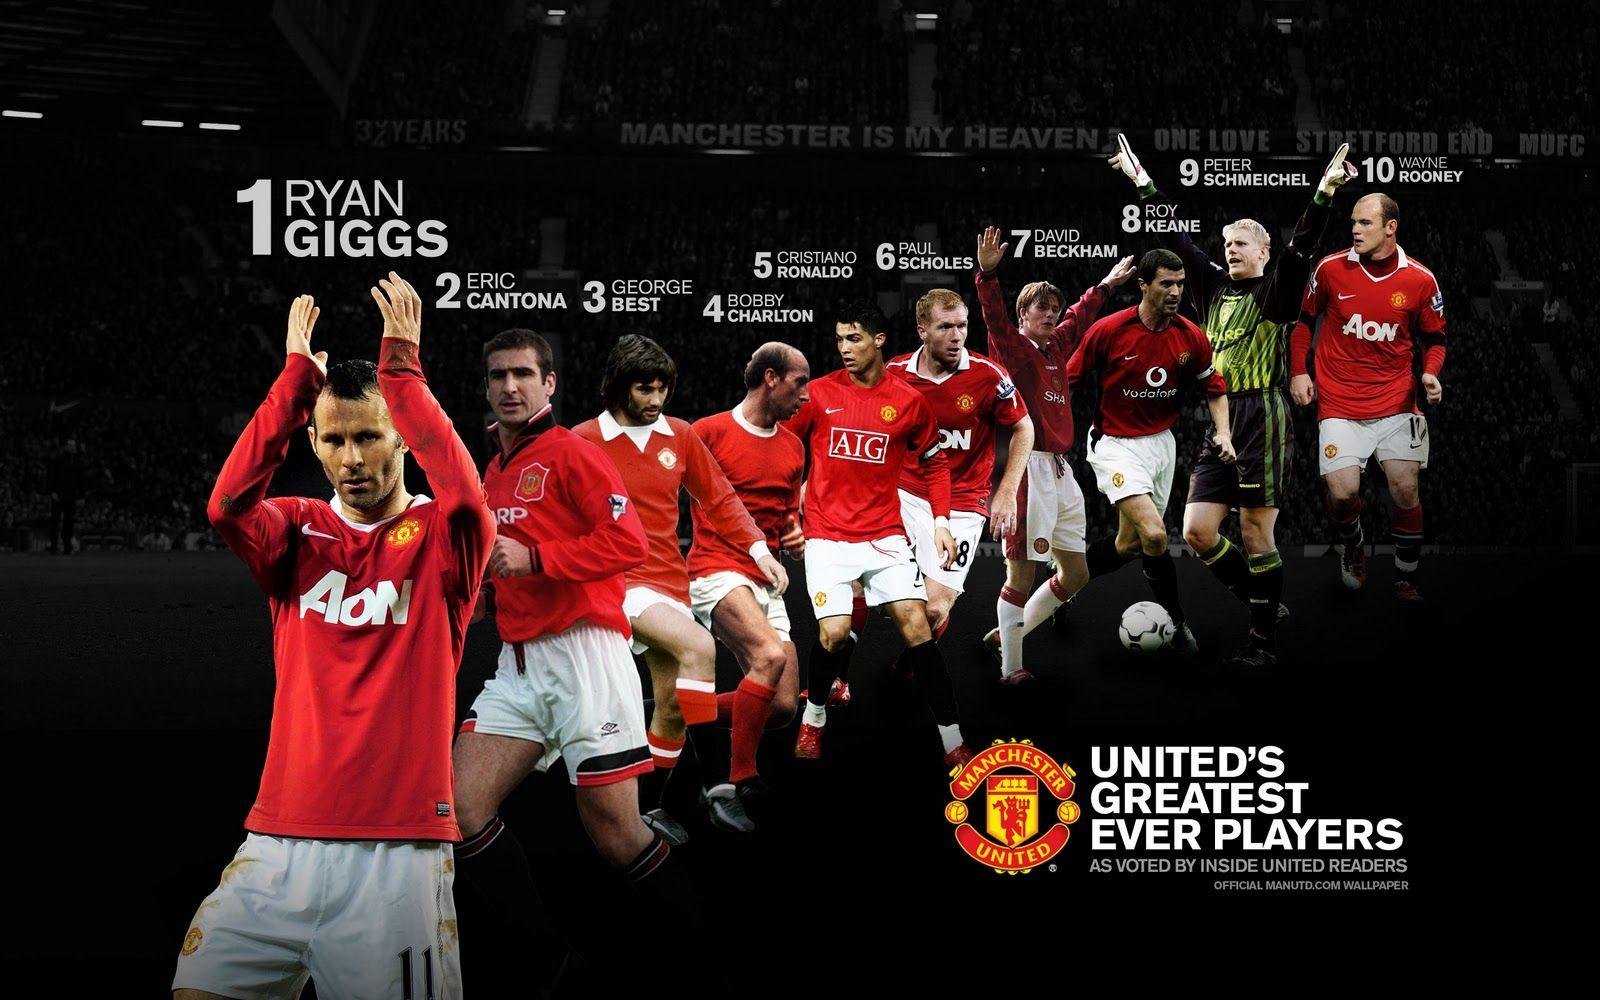 Manchester United Wallpaper HD 2013. Manchester united team, Manchester united wallpaper, Manchester united players